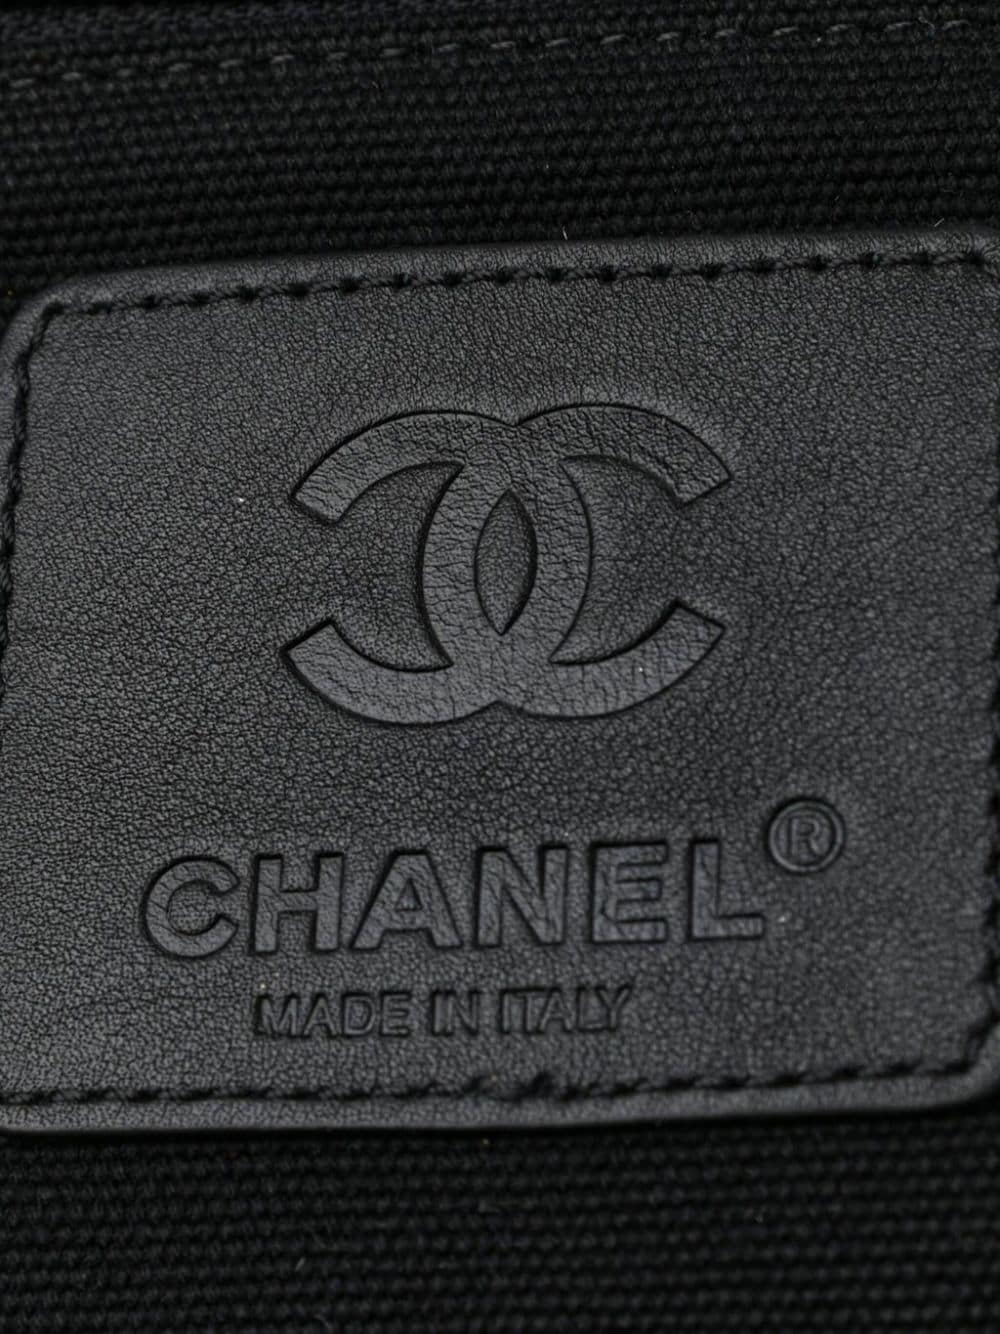 Pre-owned Chanel 菱纹绗缝手提旅行袋（2015年典藏款） In Black